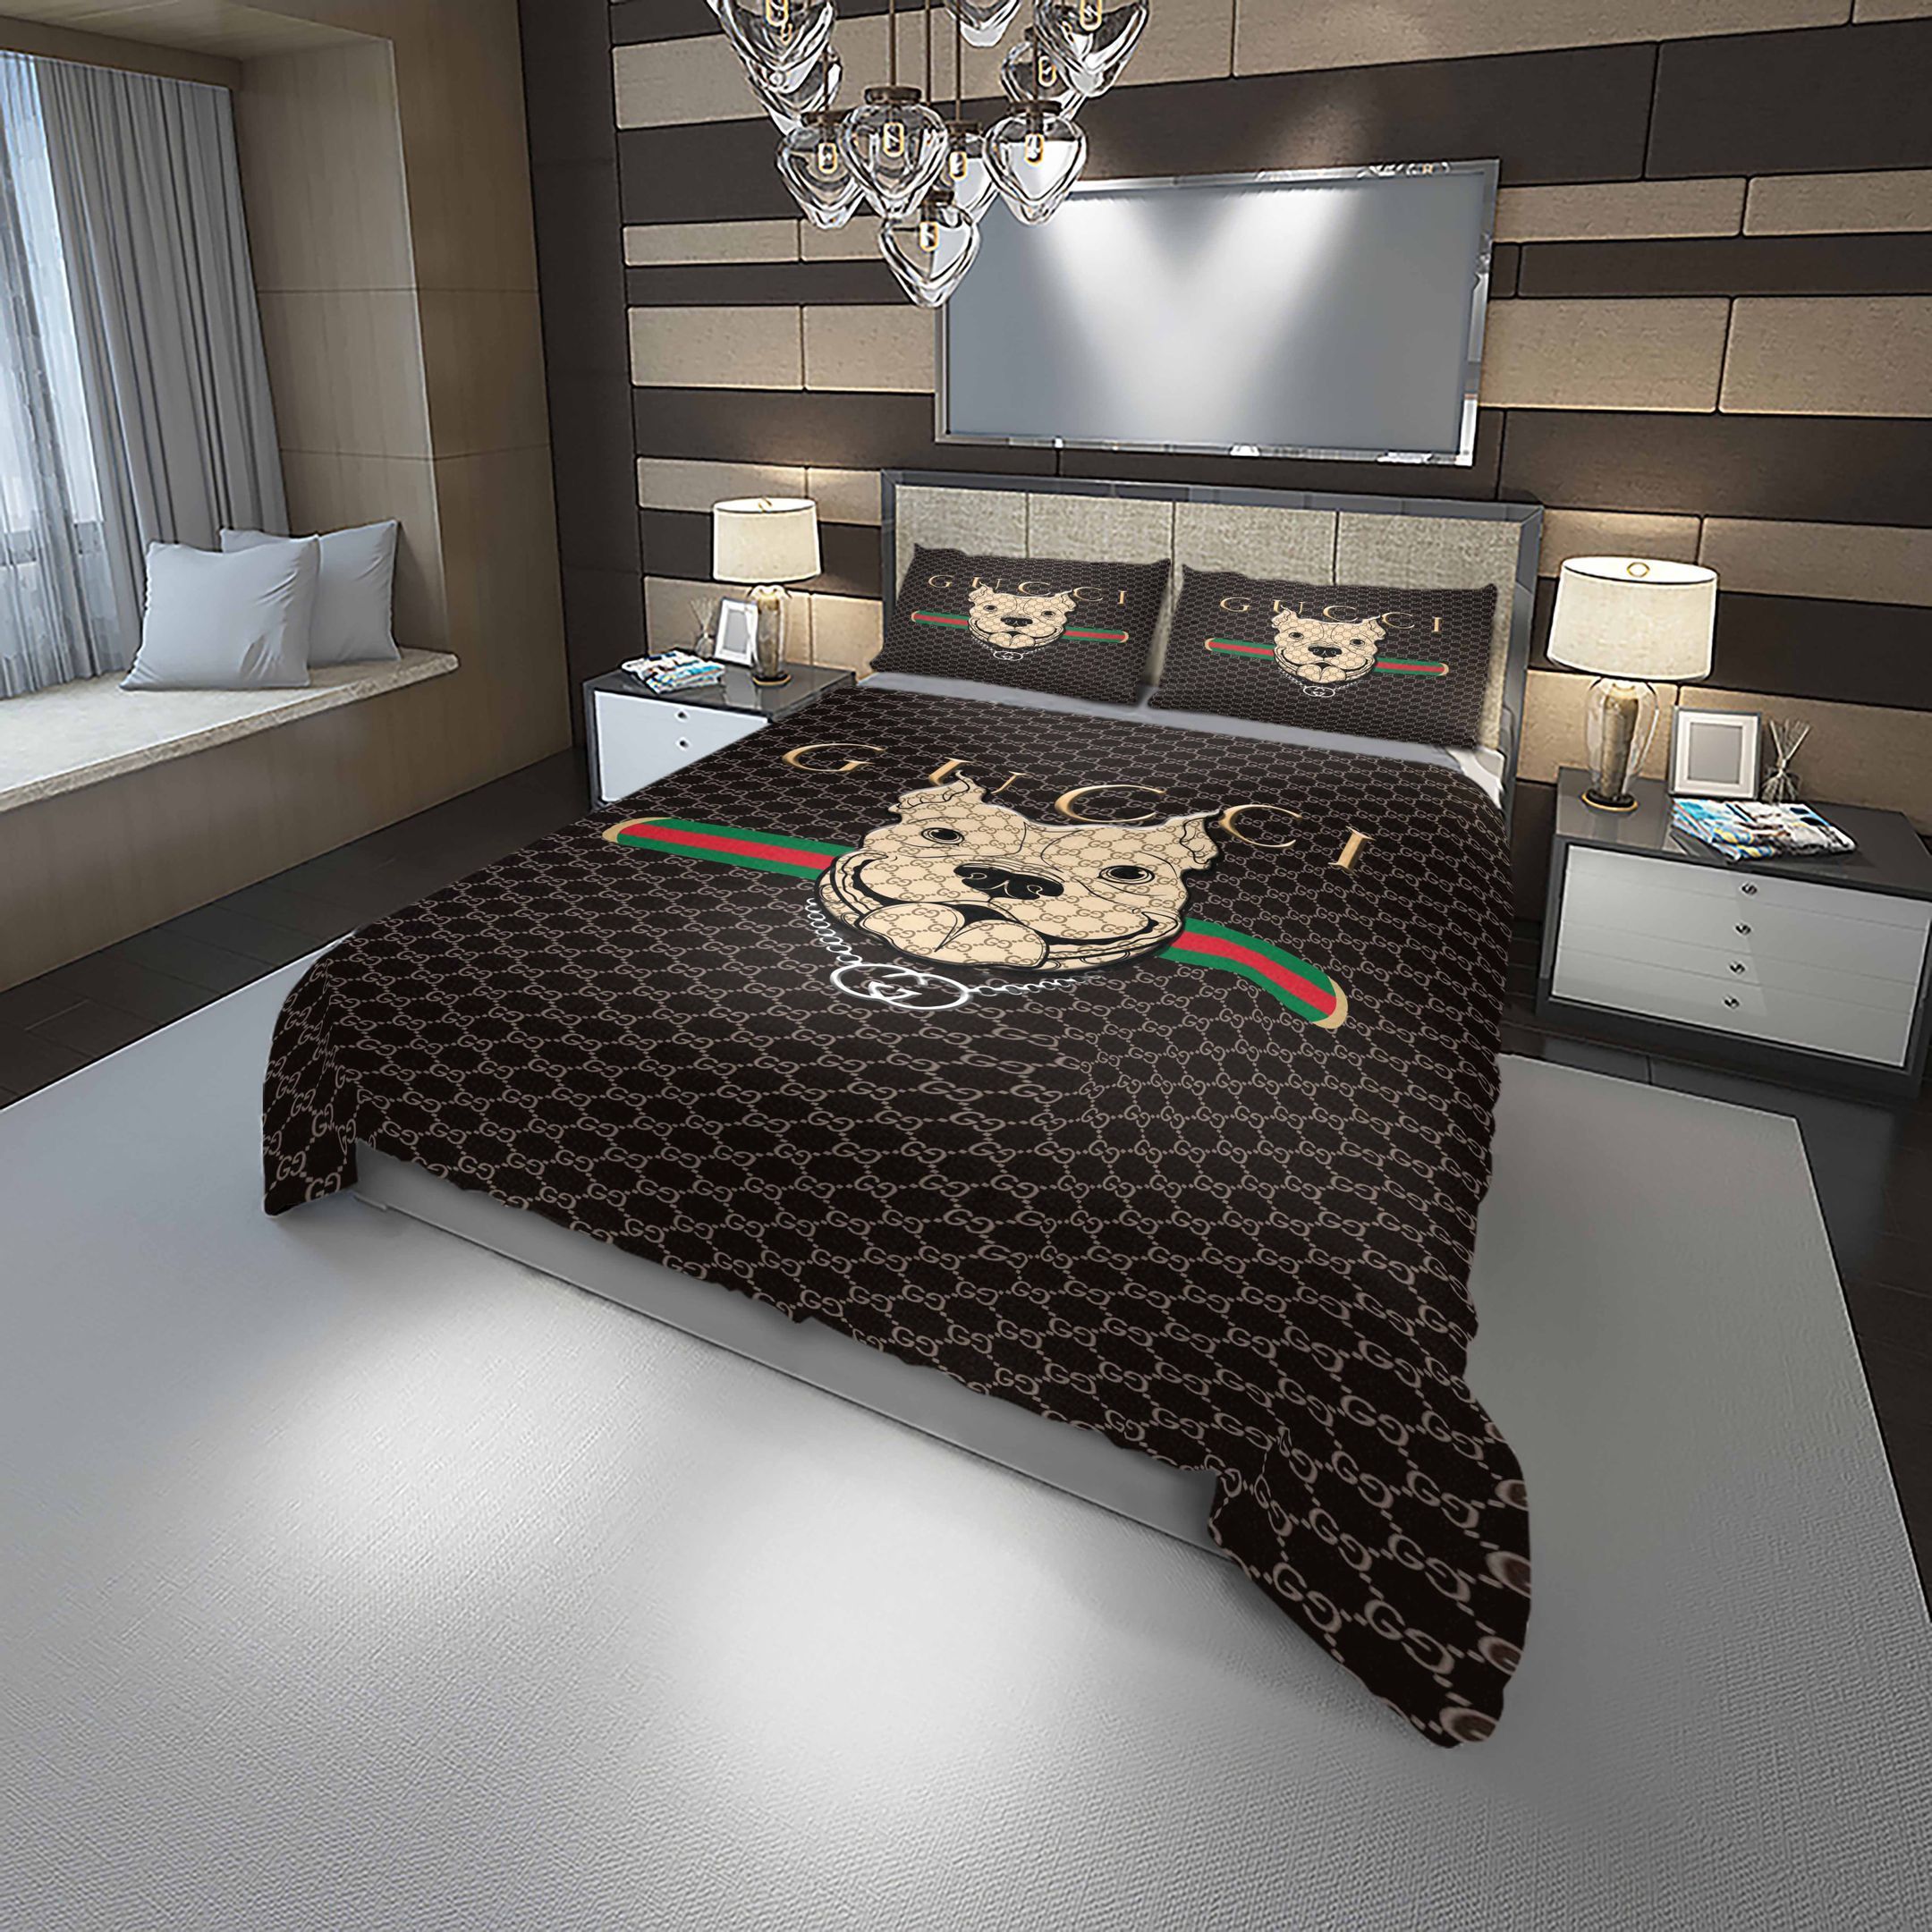 Let me show you about some luxury brand bedding set 2022 141